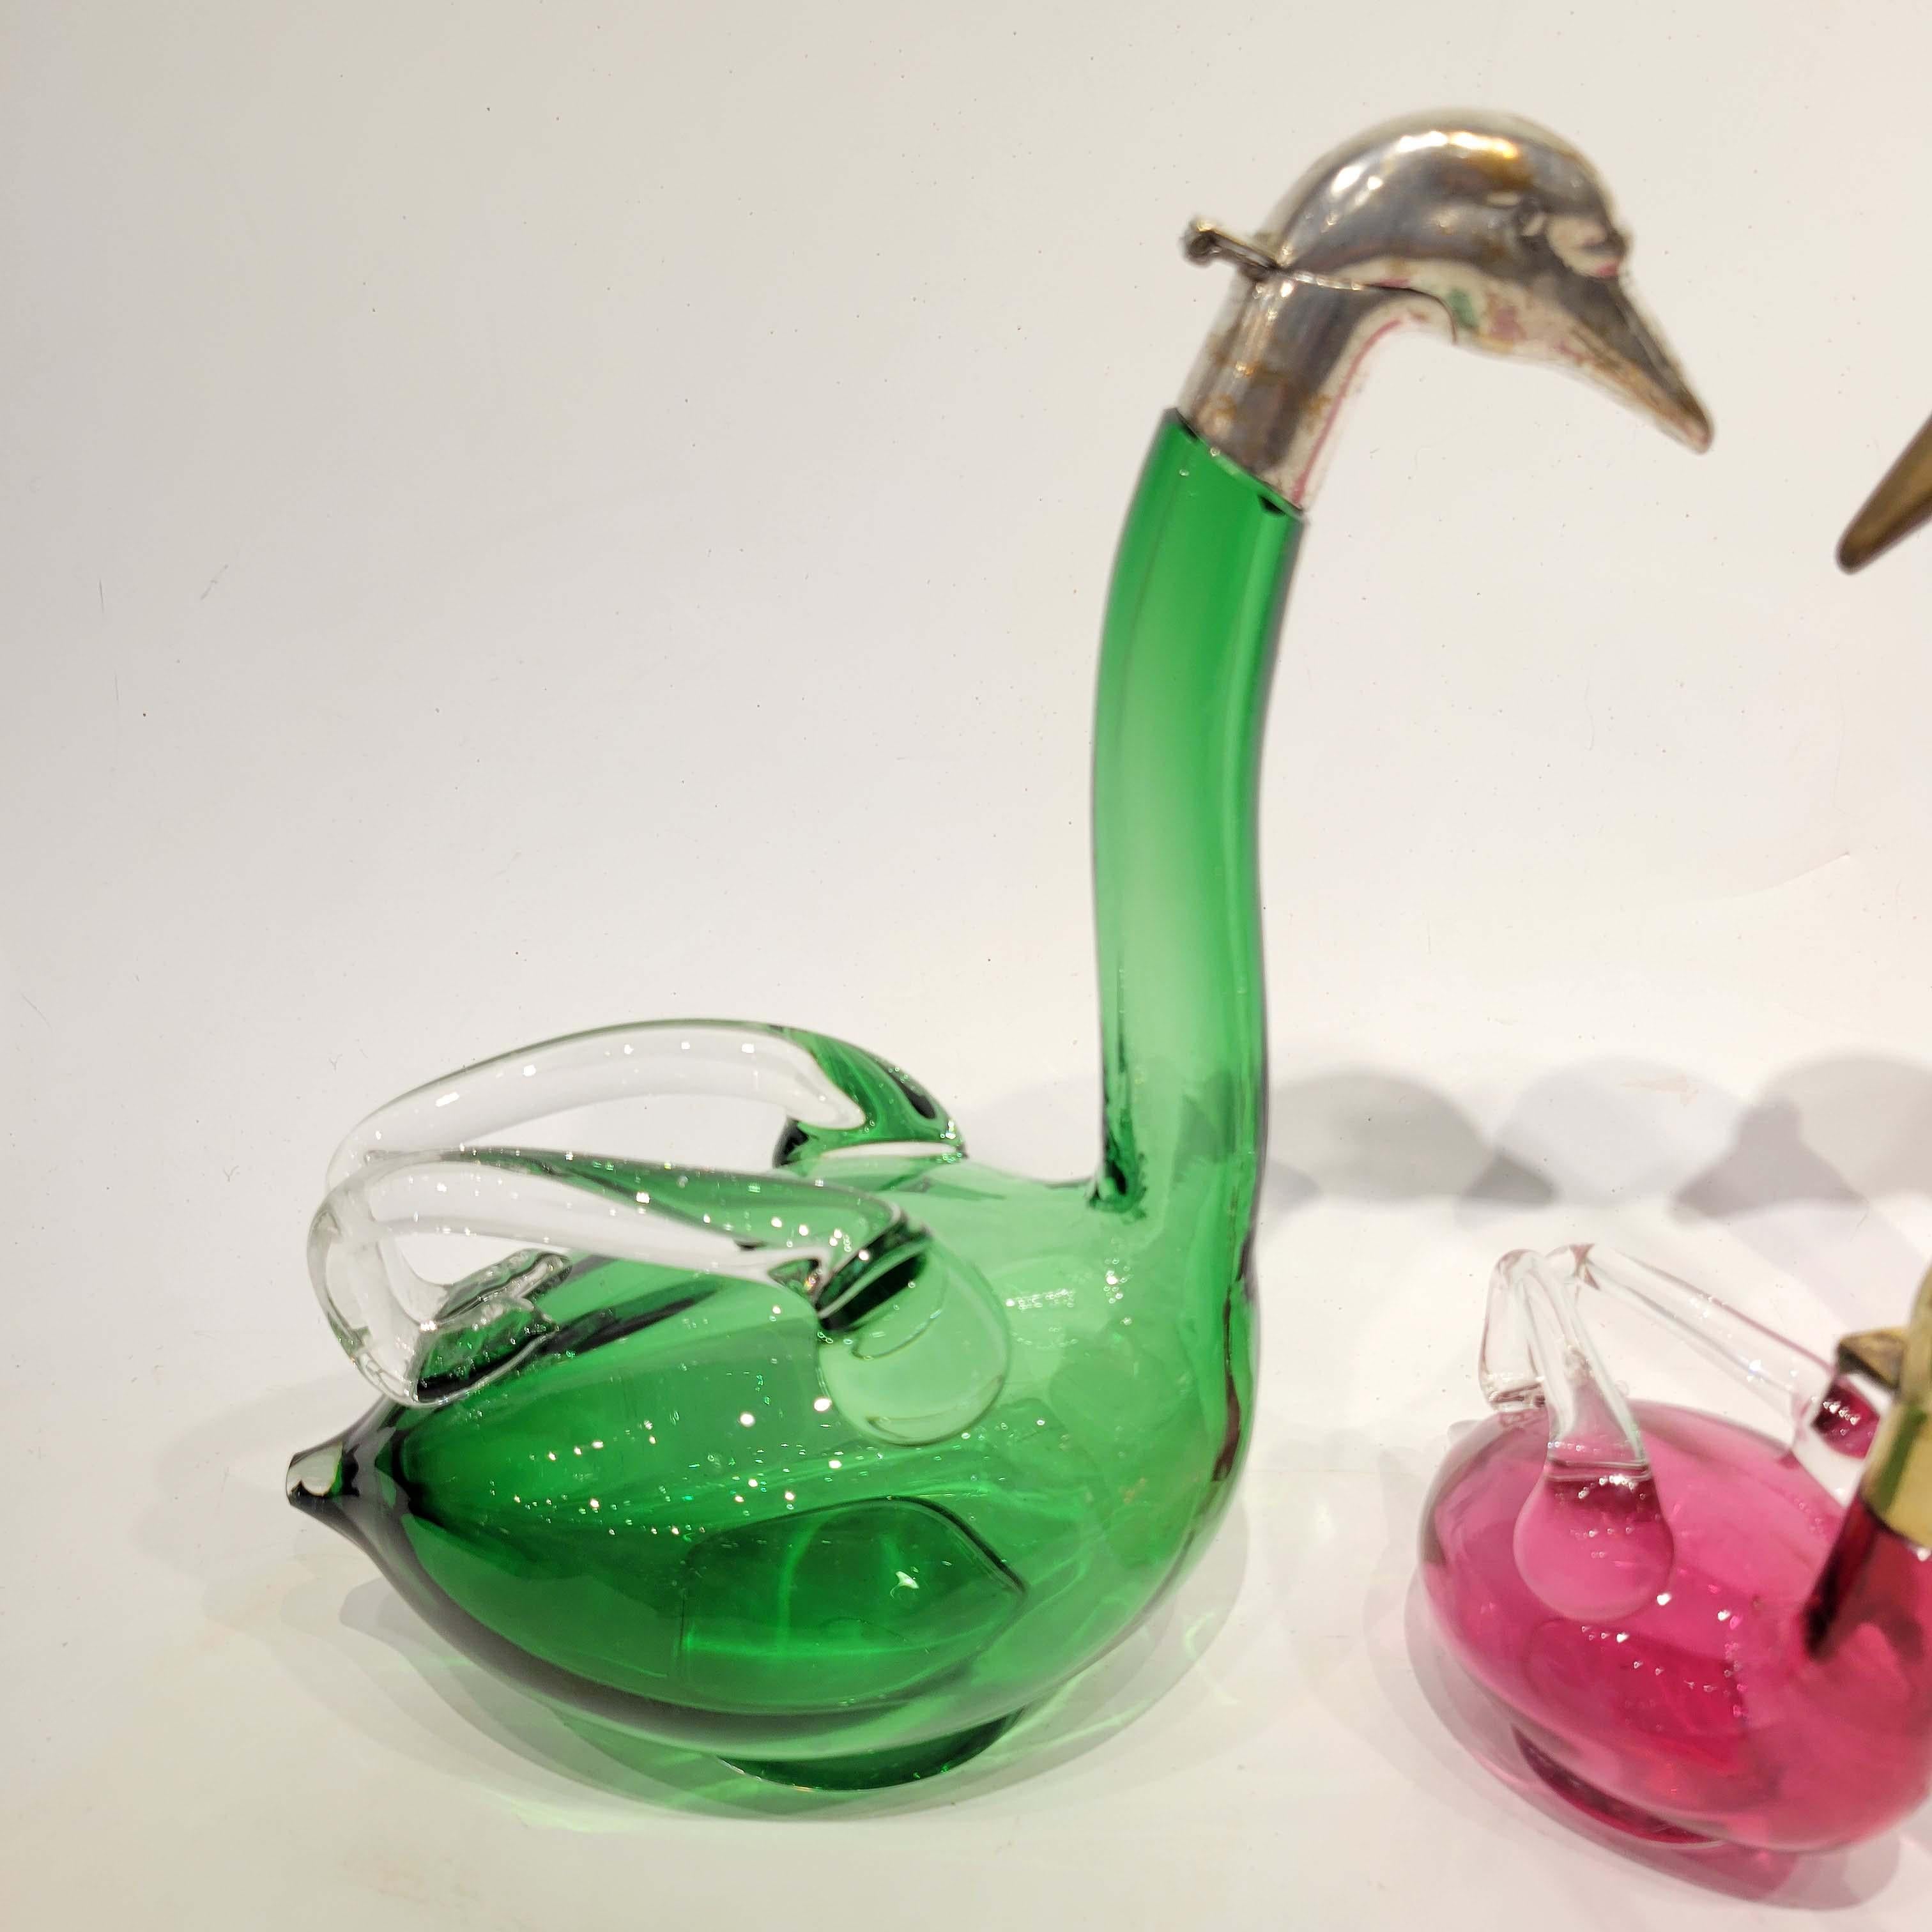 This is a wonderful group of 3 Austrian blown glass swan decanters. Stamped Austria on the bronze mount.
Each in good vintage condition. One with silverplated top, one with bronzed top and one in polished bronze top.
The larger decanter is 11.25